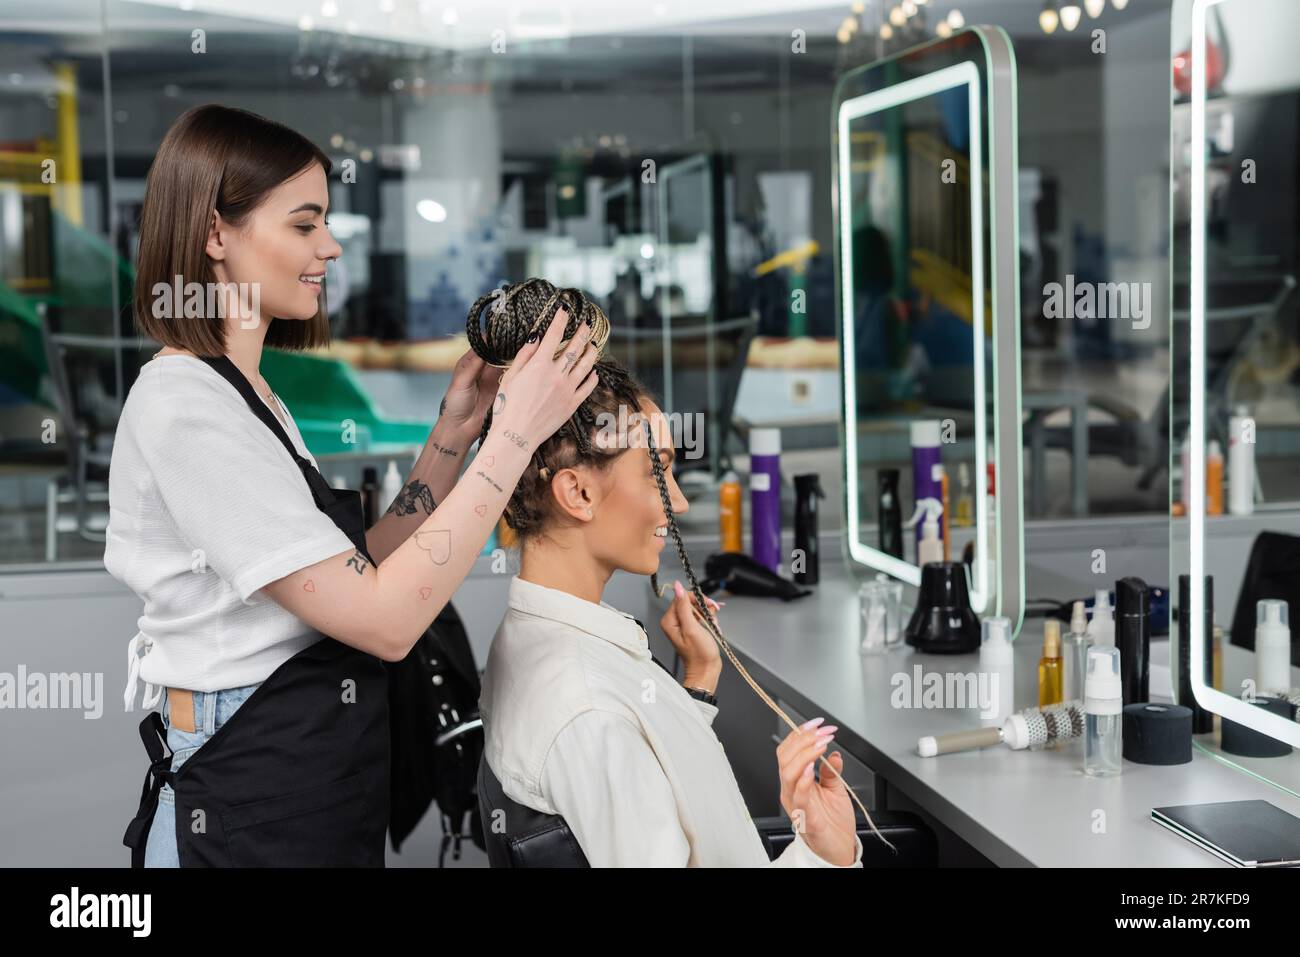 hair make over, happy hair stylist doing hair of female client with braids, cheerful women, client satisfaction, customer in salon, beauty service, sa Stock Photo